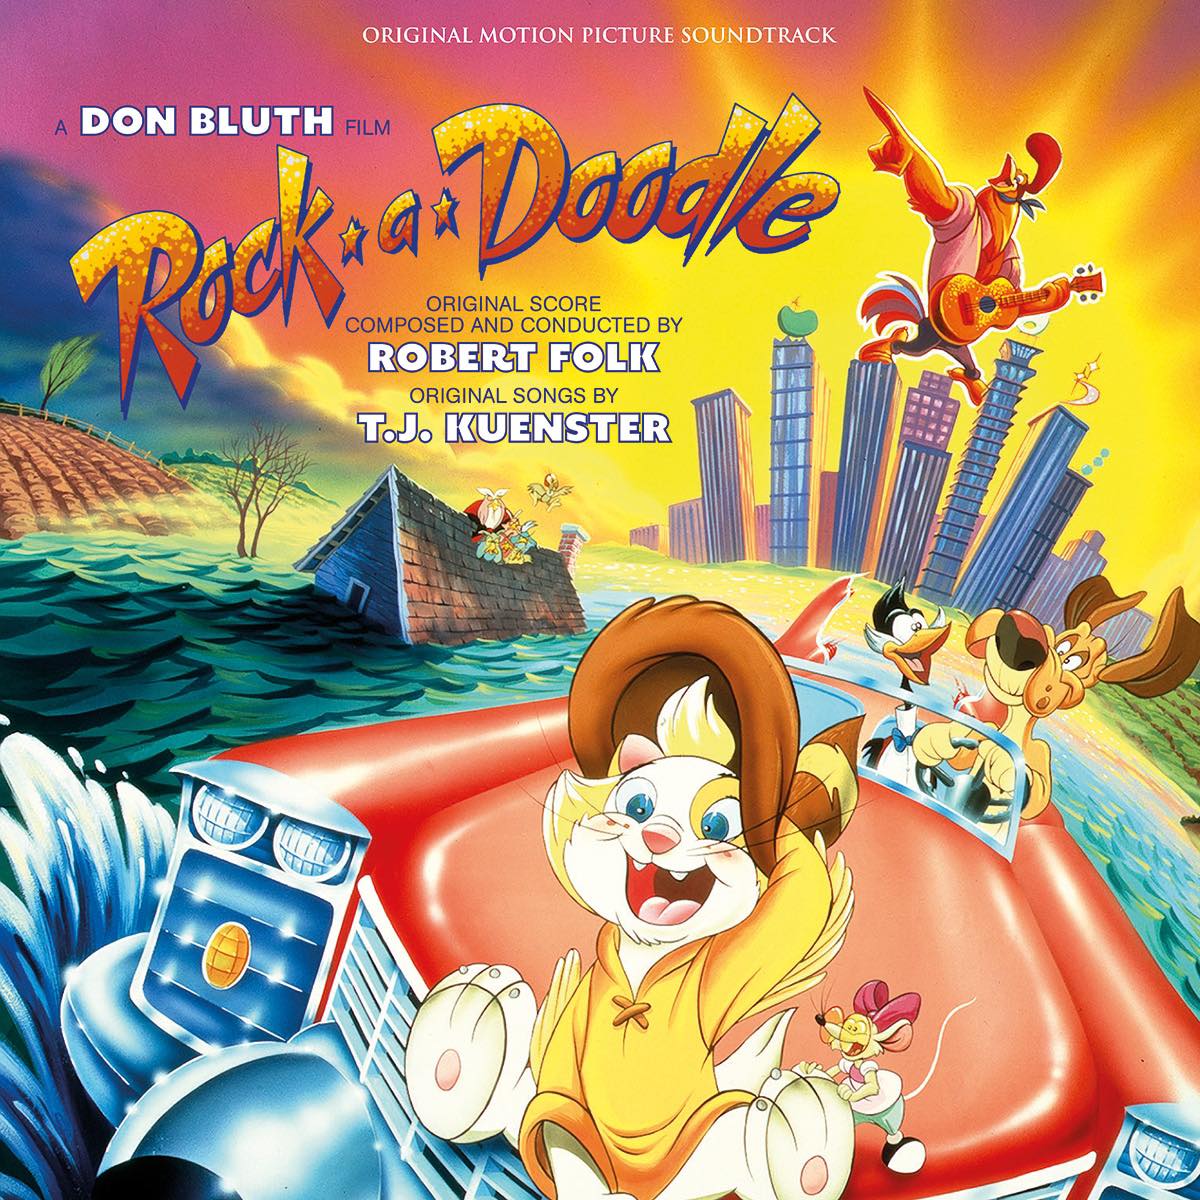 The Sun do Shine with ROBERT FOLK and T.J. KUENSTER’s ROCK-A-DOODLE on Quartet Records!